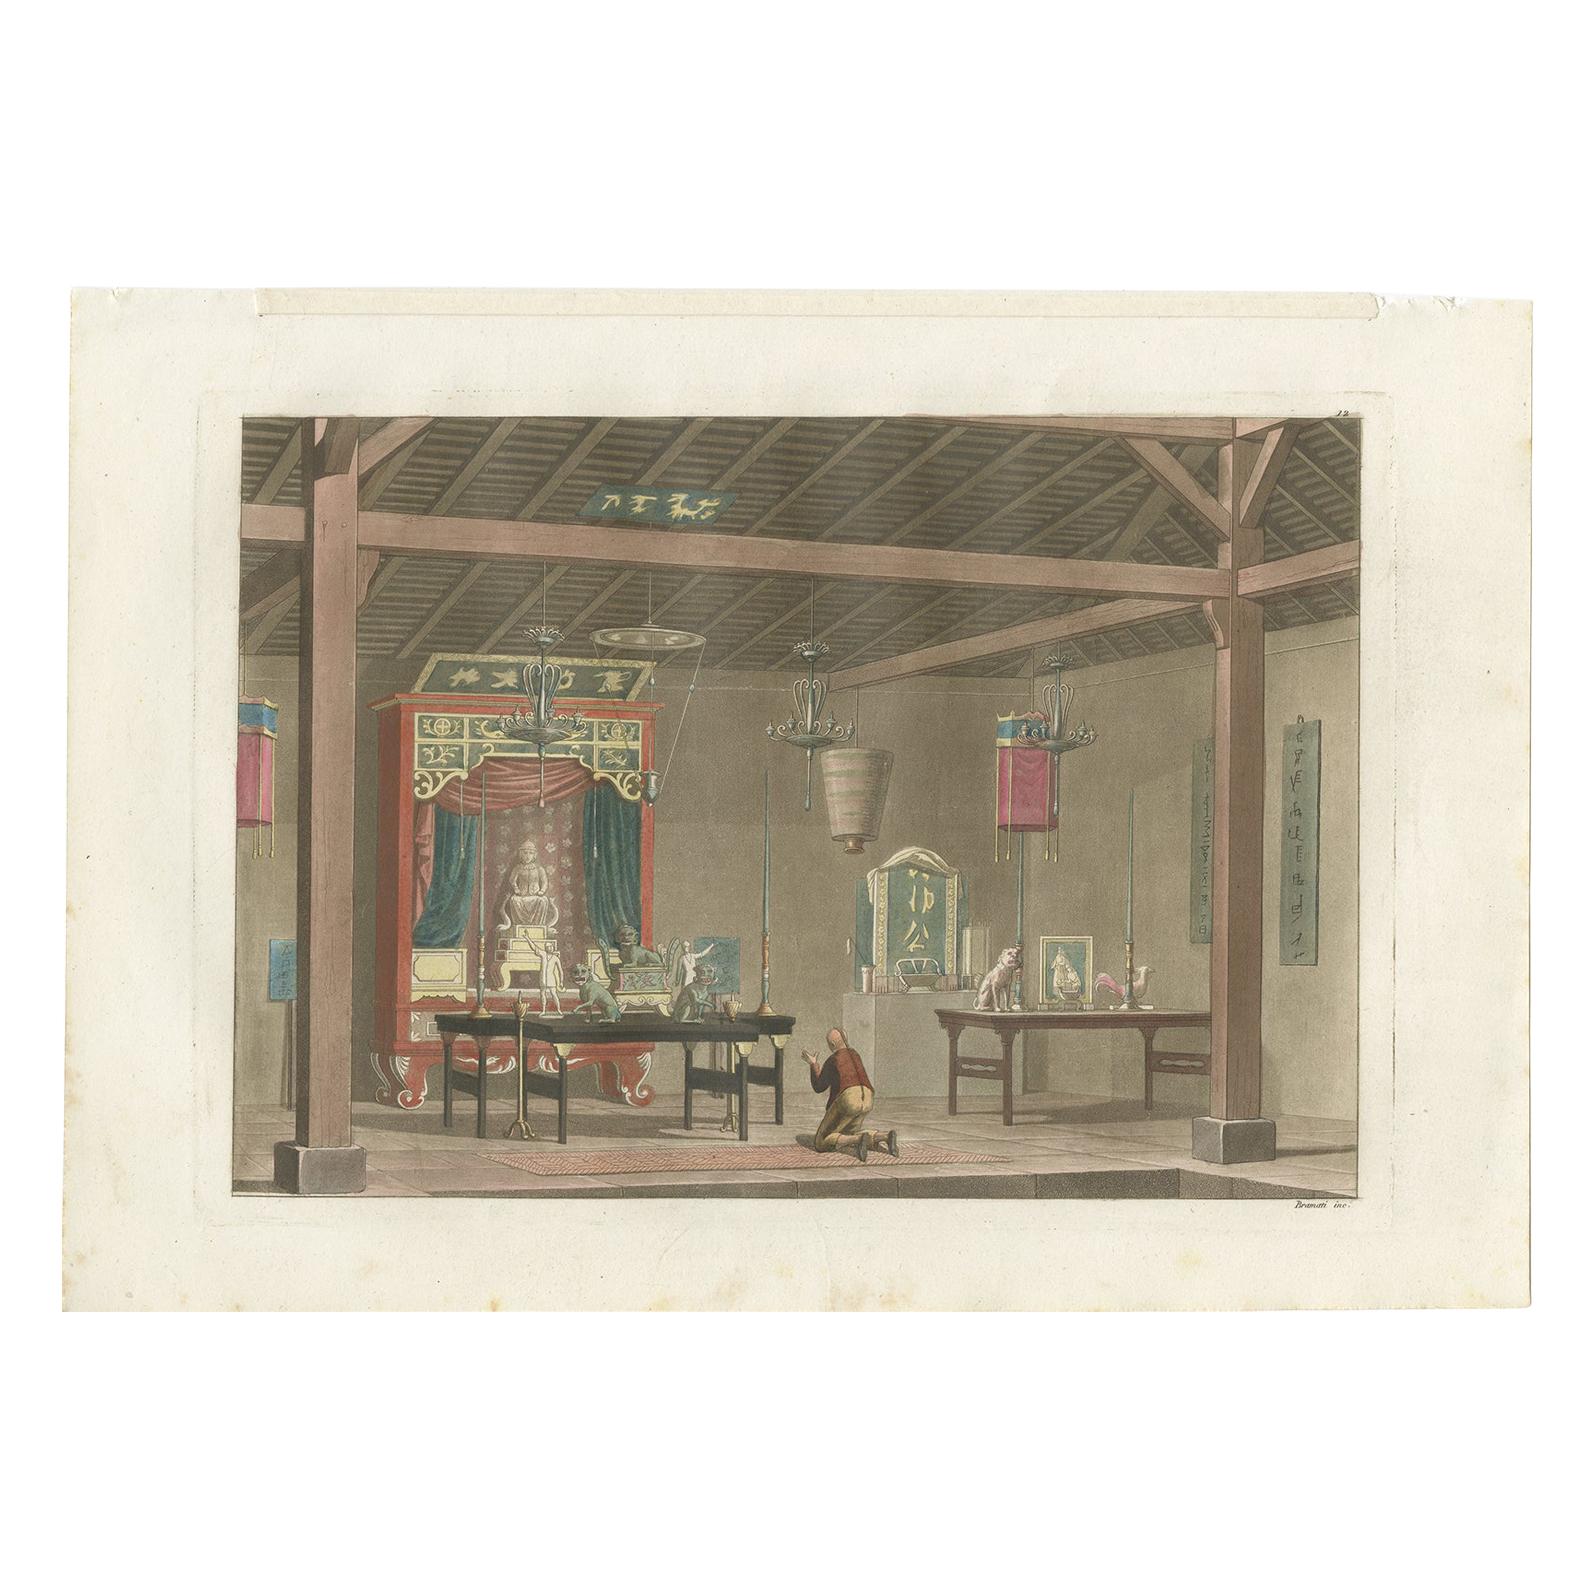 Antique Print of a Chinese Temple in Kupang by Ferrario, '1831'